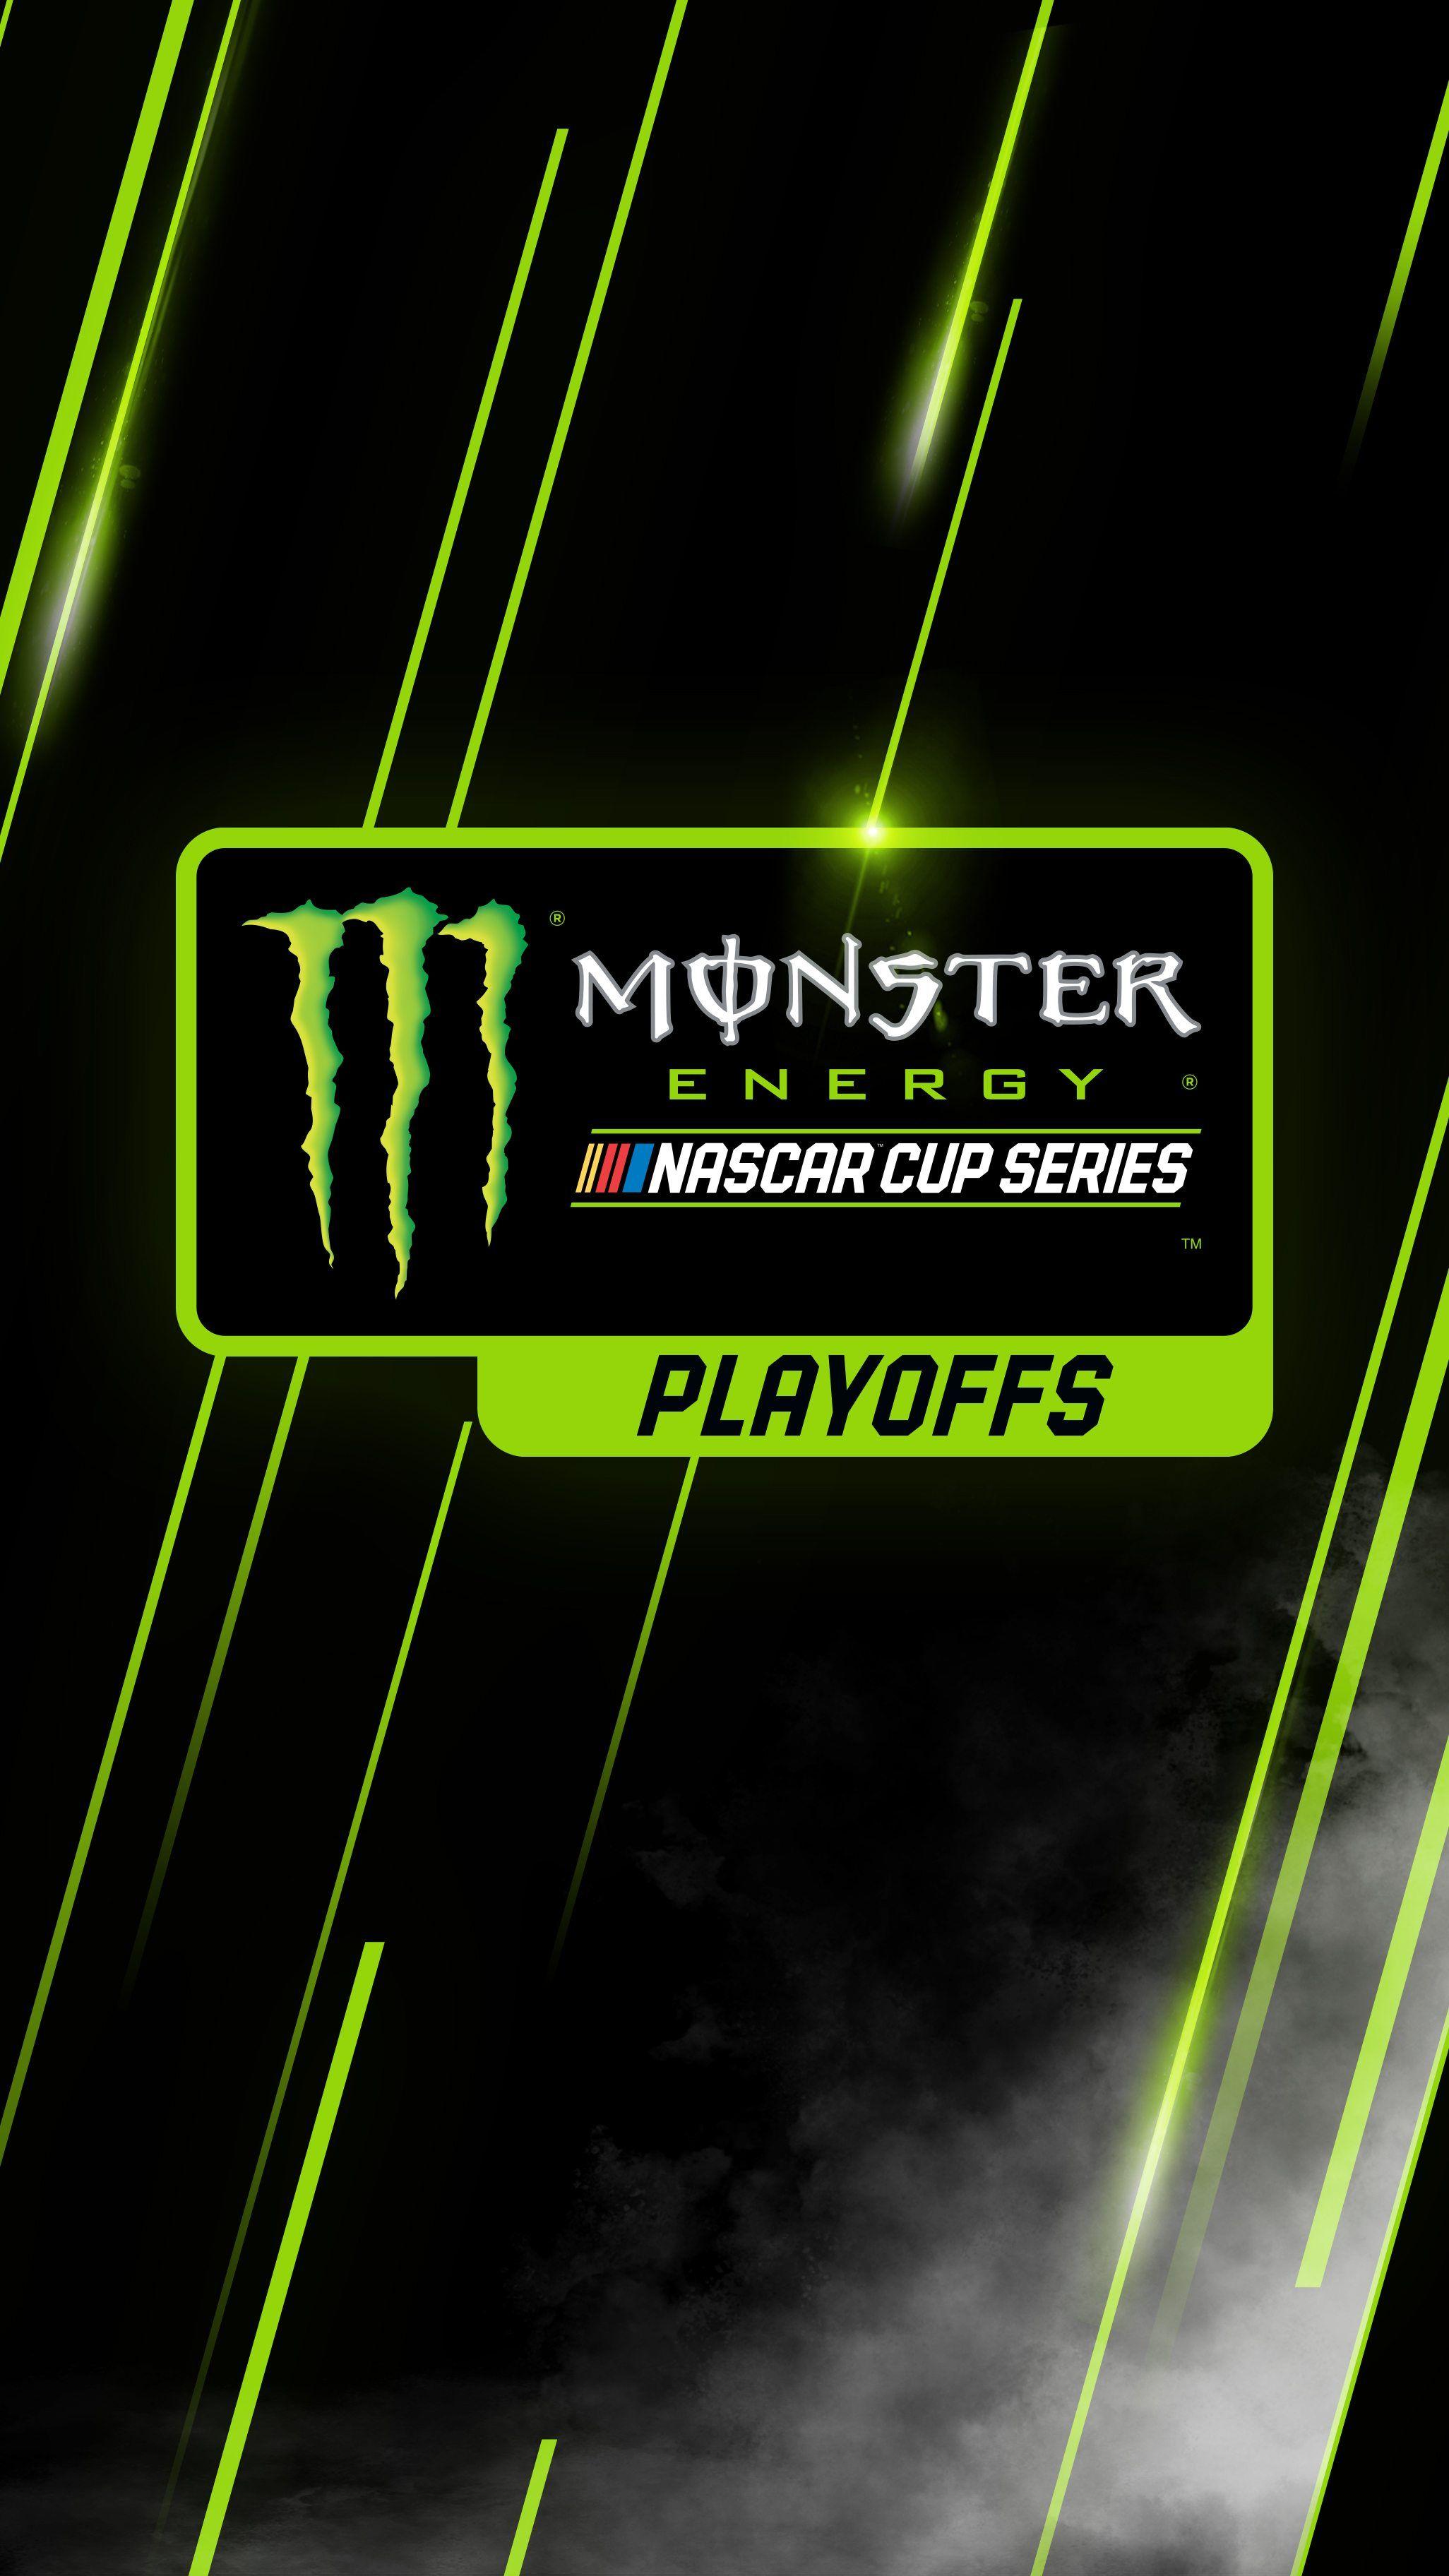 NASCAR Playoffs wallpaper, home screens available now